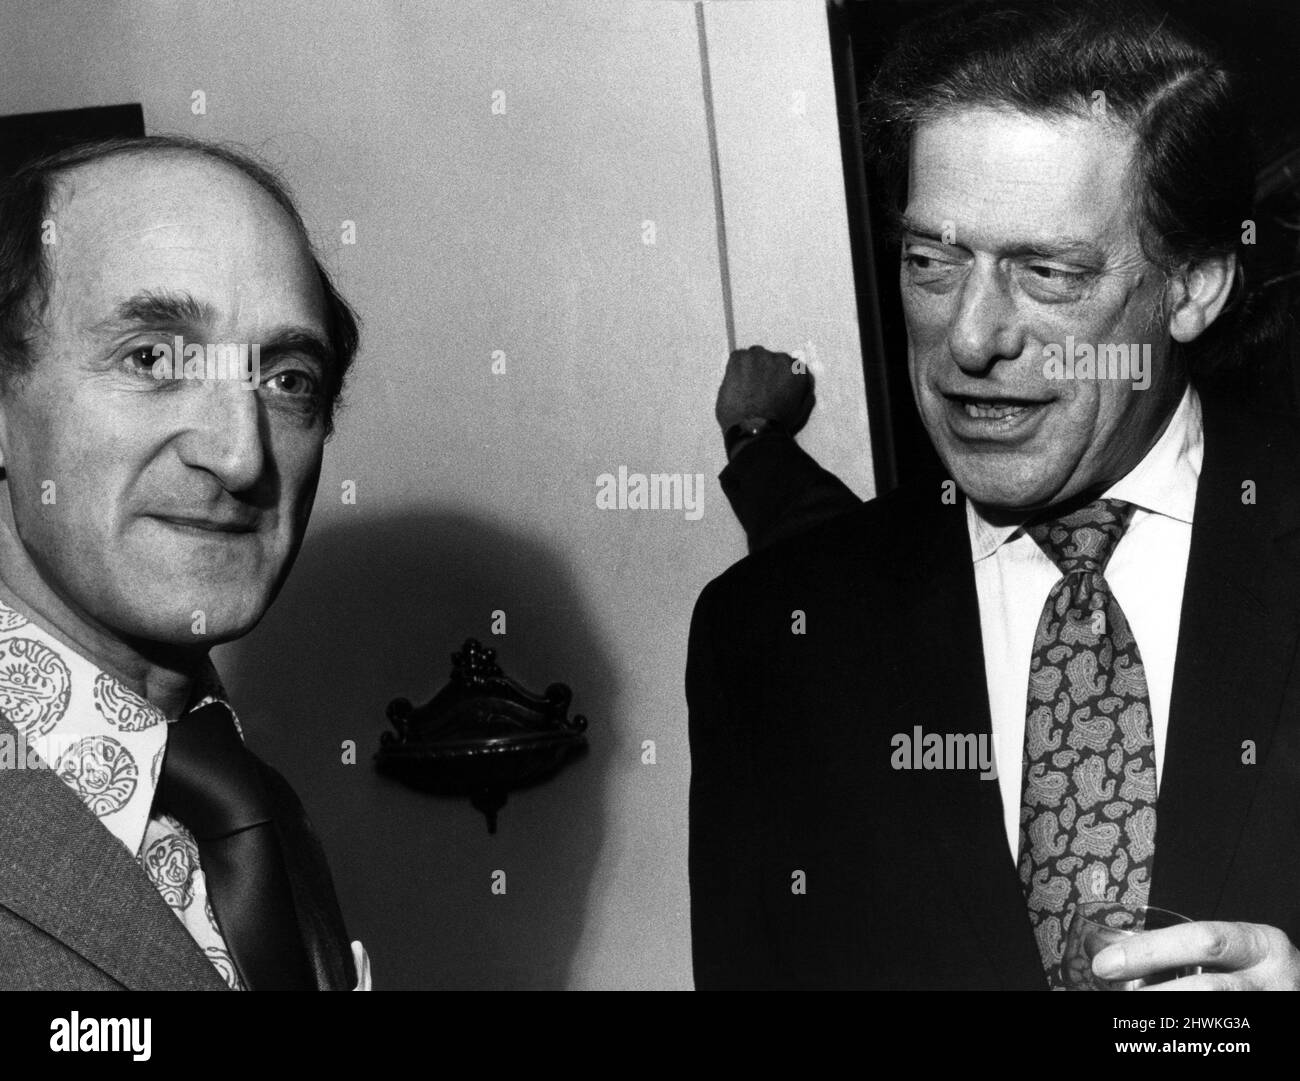 George Henry Hubert Lascelles, 7th Earl of Harewood & Ron Moody actor, together at the London Coliseum theatre where Mr Moody will be playing Captain Hook in JM Barry's Peter Pan, October 1972. *** Local Caption *** The Hon. George Lascelles before 1929 Viscount Lascelles between 1929 and 1947 Stock Photo